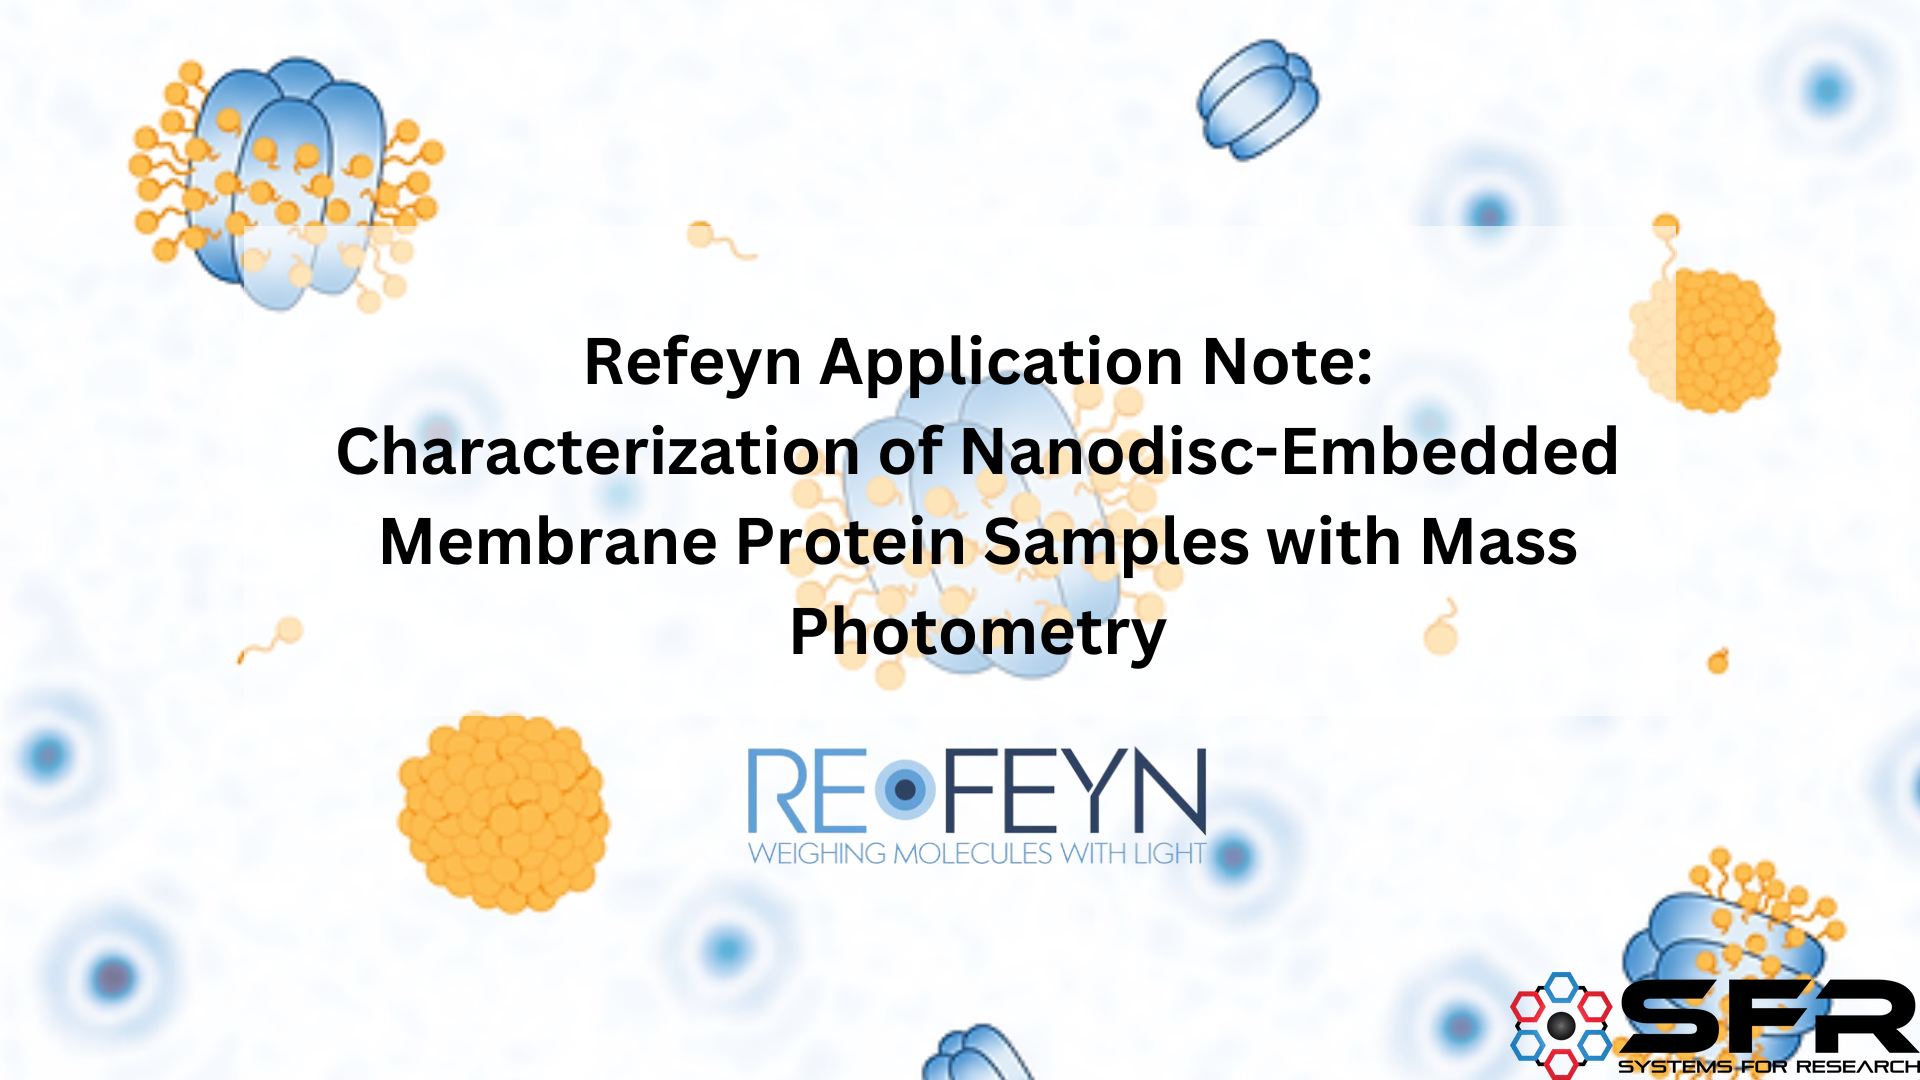 Characterization of Nanodisc-Embedded Membrane Protein Samples with Mass Photometry